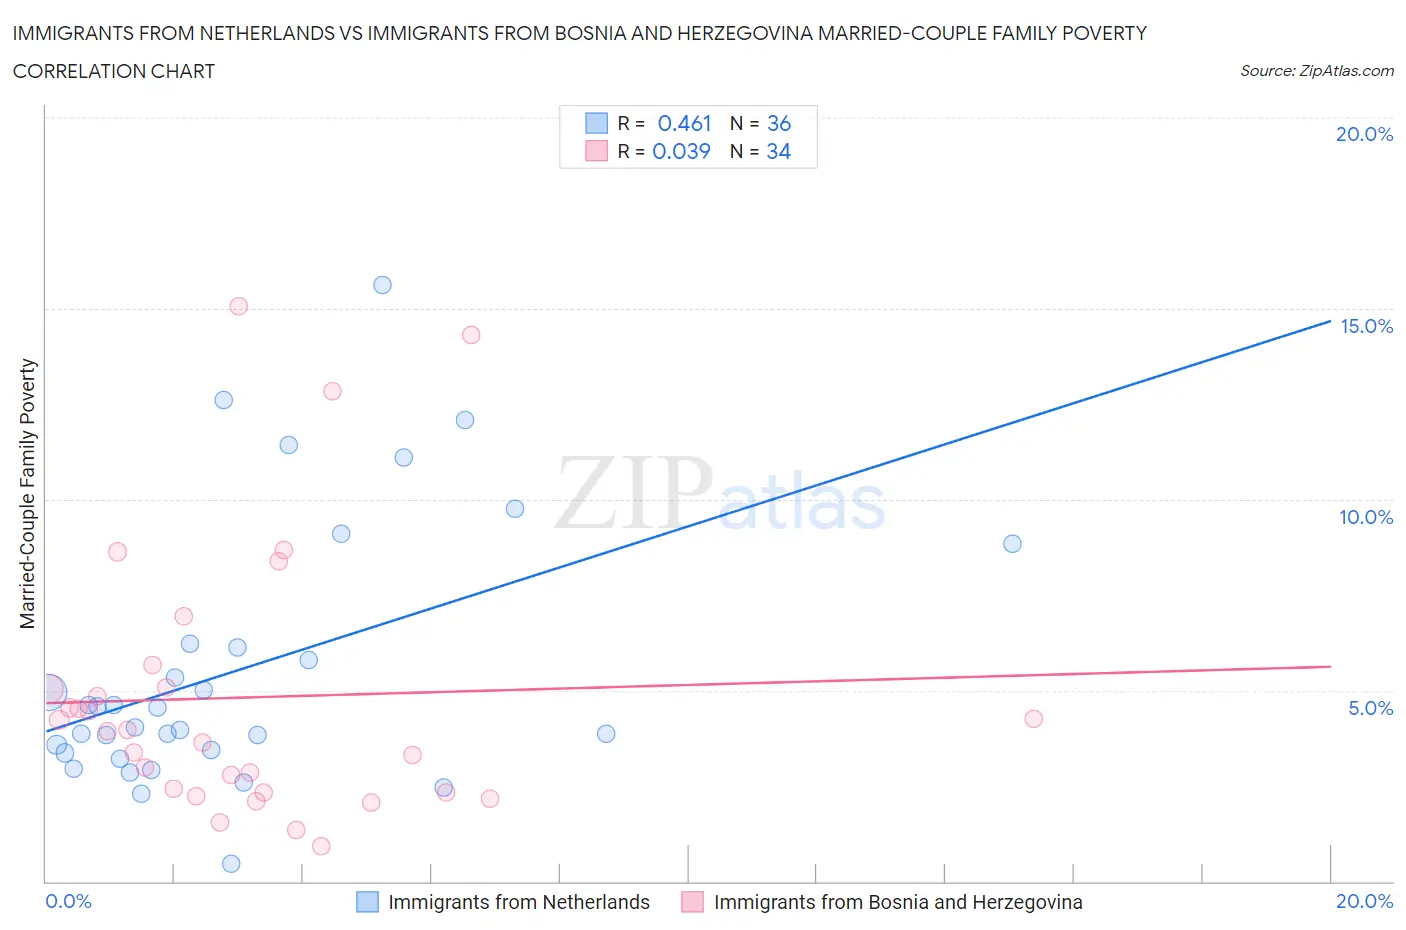 Immigrants from Netherlands vs Immigrants from Bosnia and Herzegovina Married-Couple Family Poverty